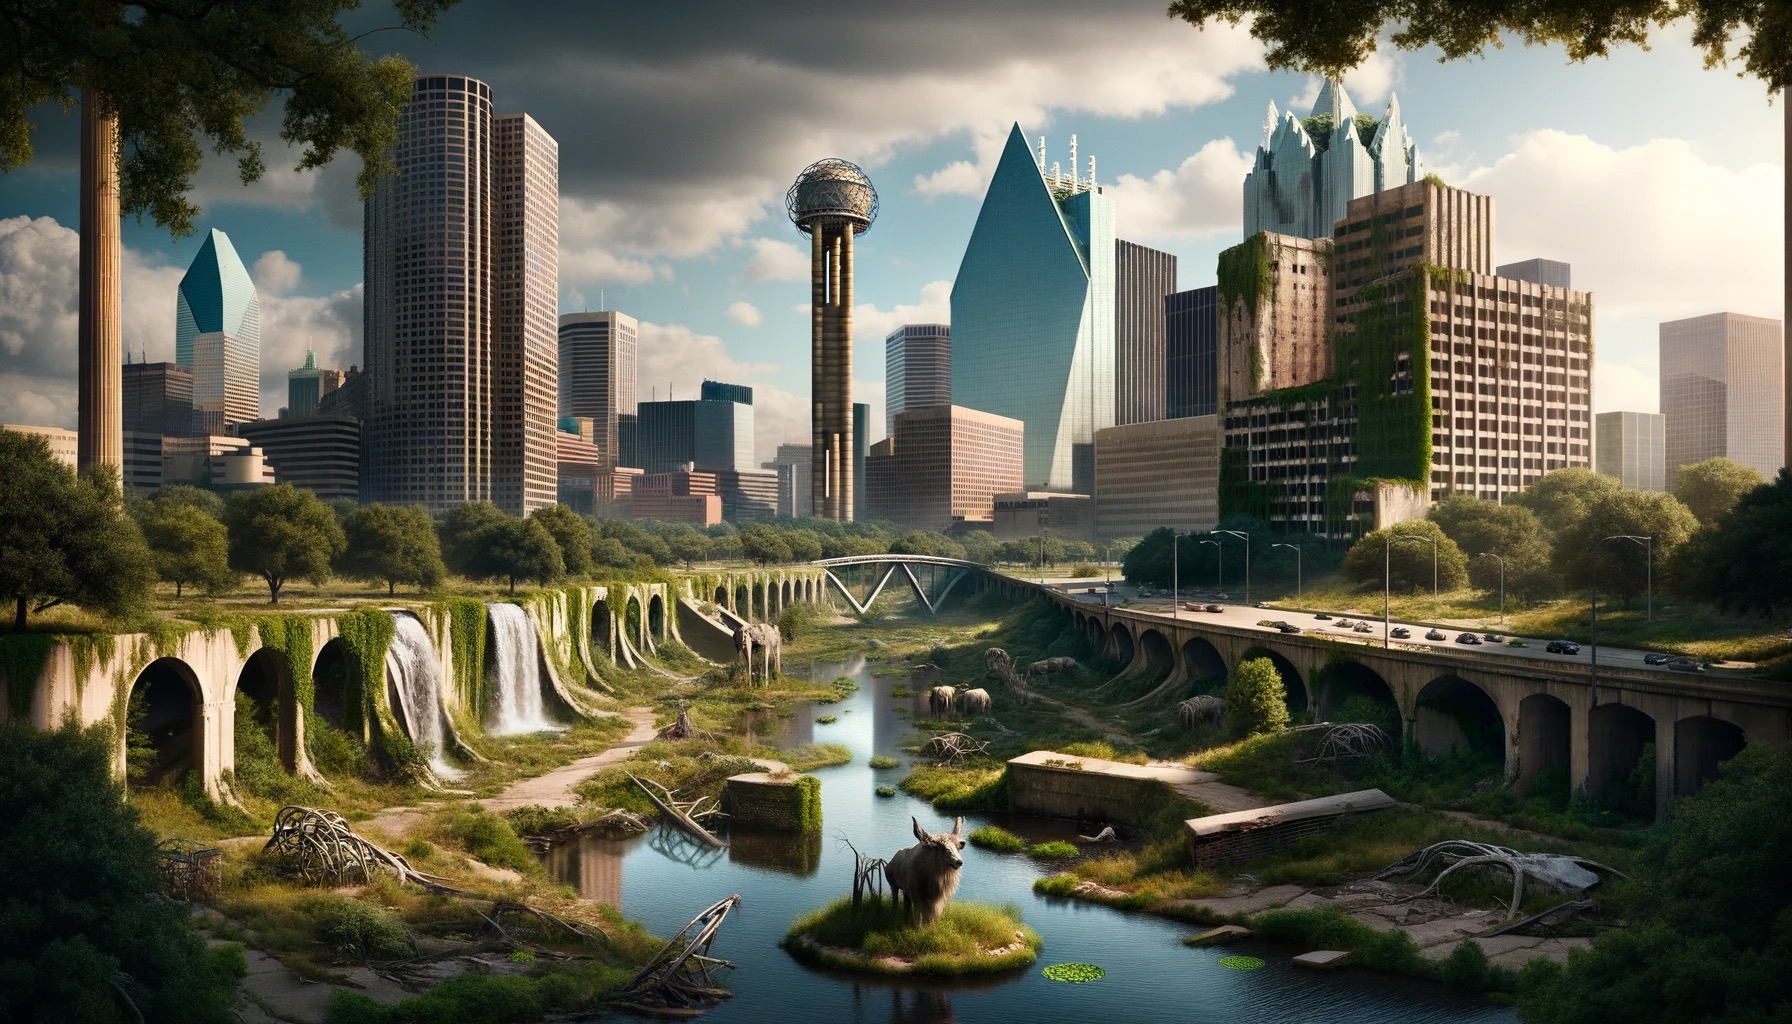 Dallas 100 years from now